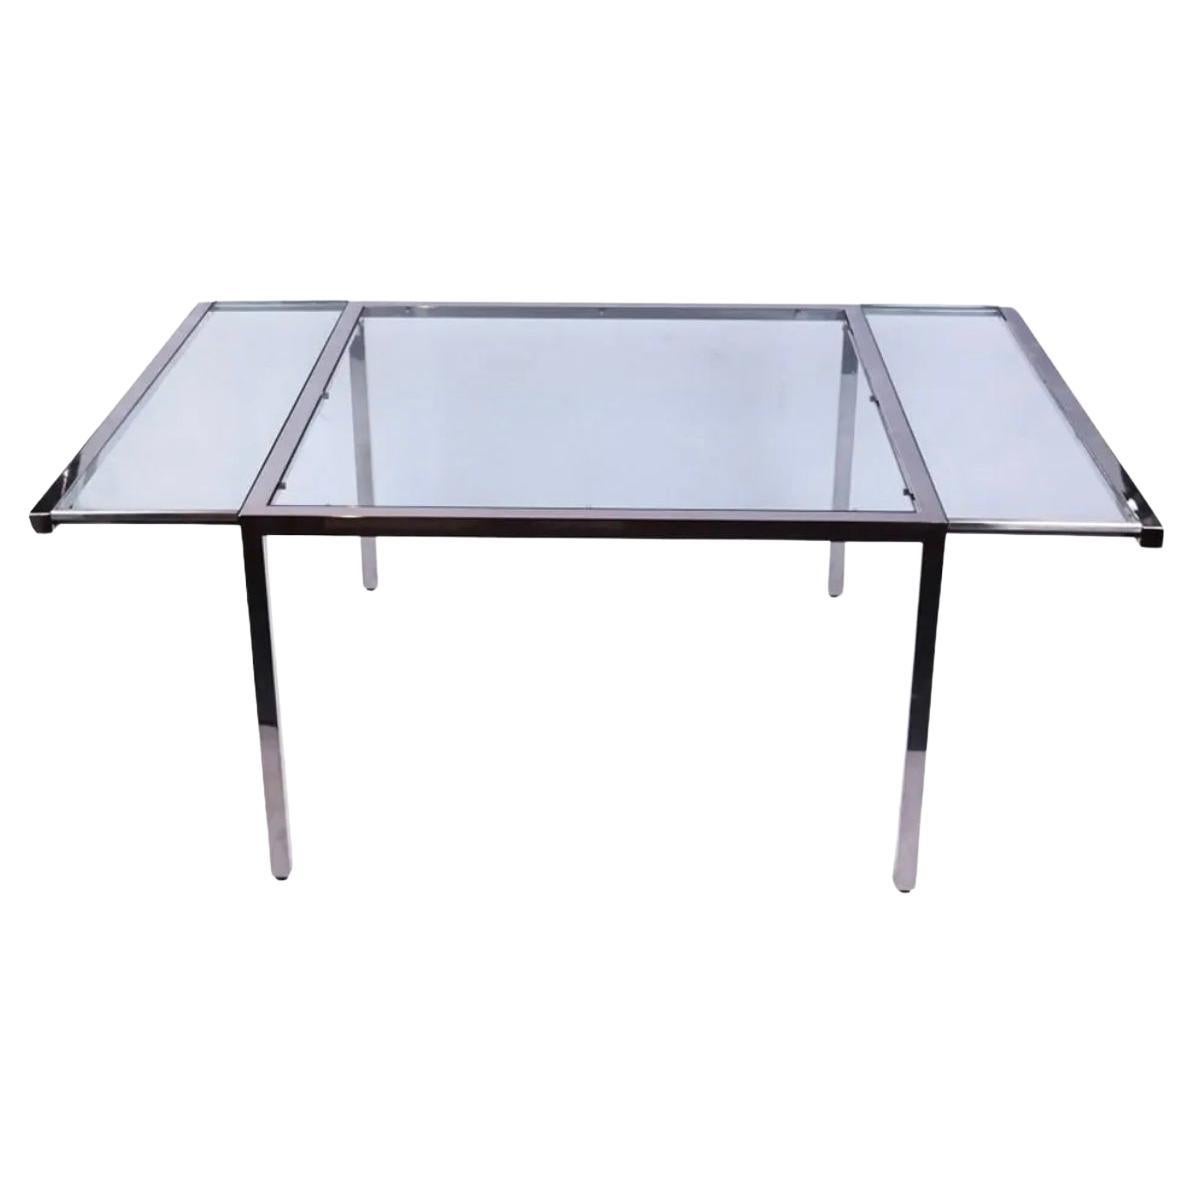 Post modern glass and chrome dining table circa 1970 with pullout support for glass leaves. Chrome Tube frame with thick glass square top and 2 thick glass leaves. Has an extension on the left and right side of the table that pull out. Leaves drop